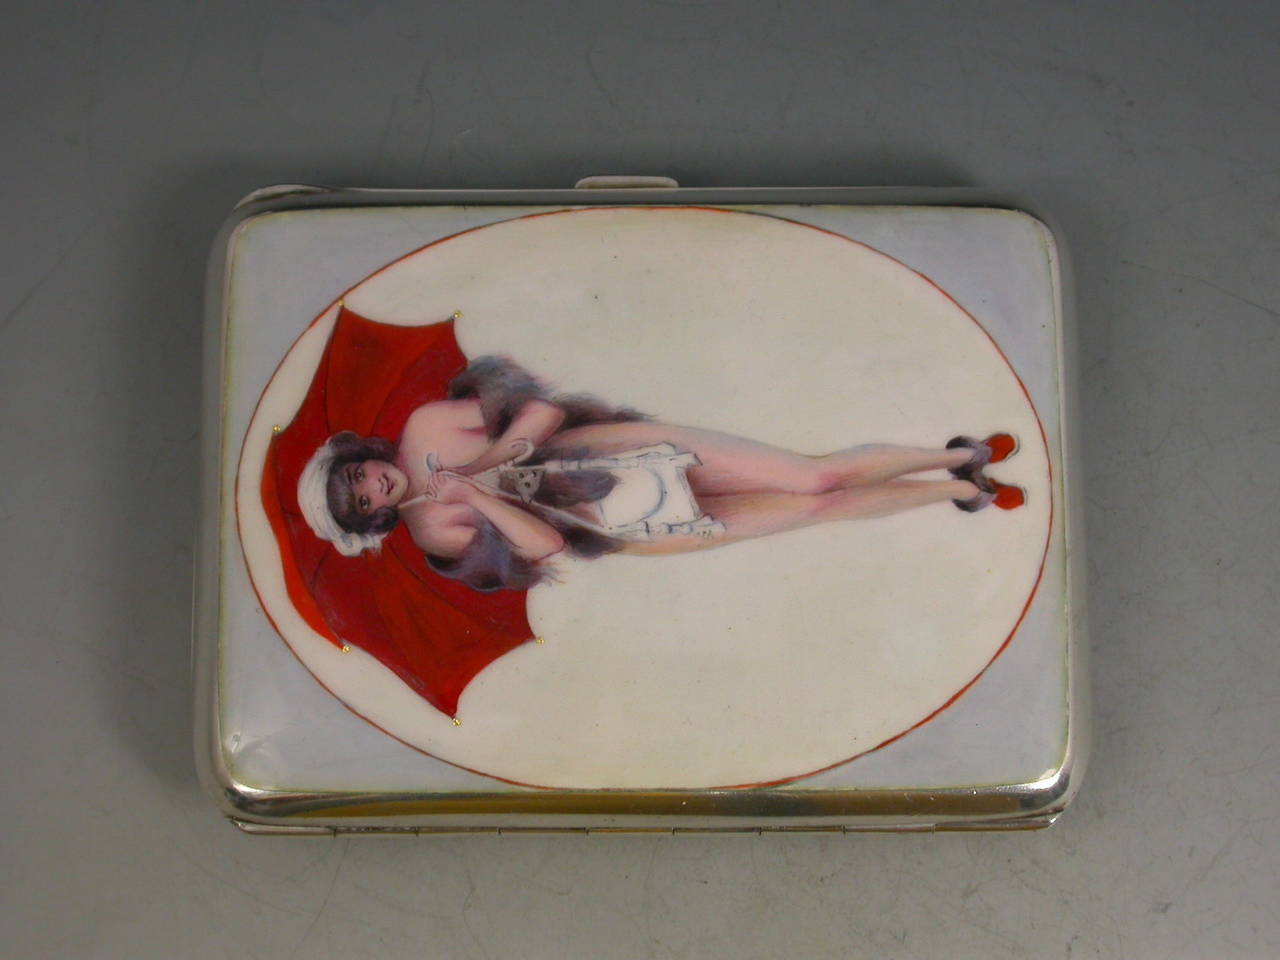 A fine quality early 20th century silver and enamel cigarette case of rounded rectangular form with sprung opening mechanism, the cover enameled with a young lady wearing just a mink stole and red shoes, holding a white handbag and a red umbrella.